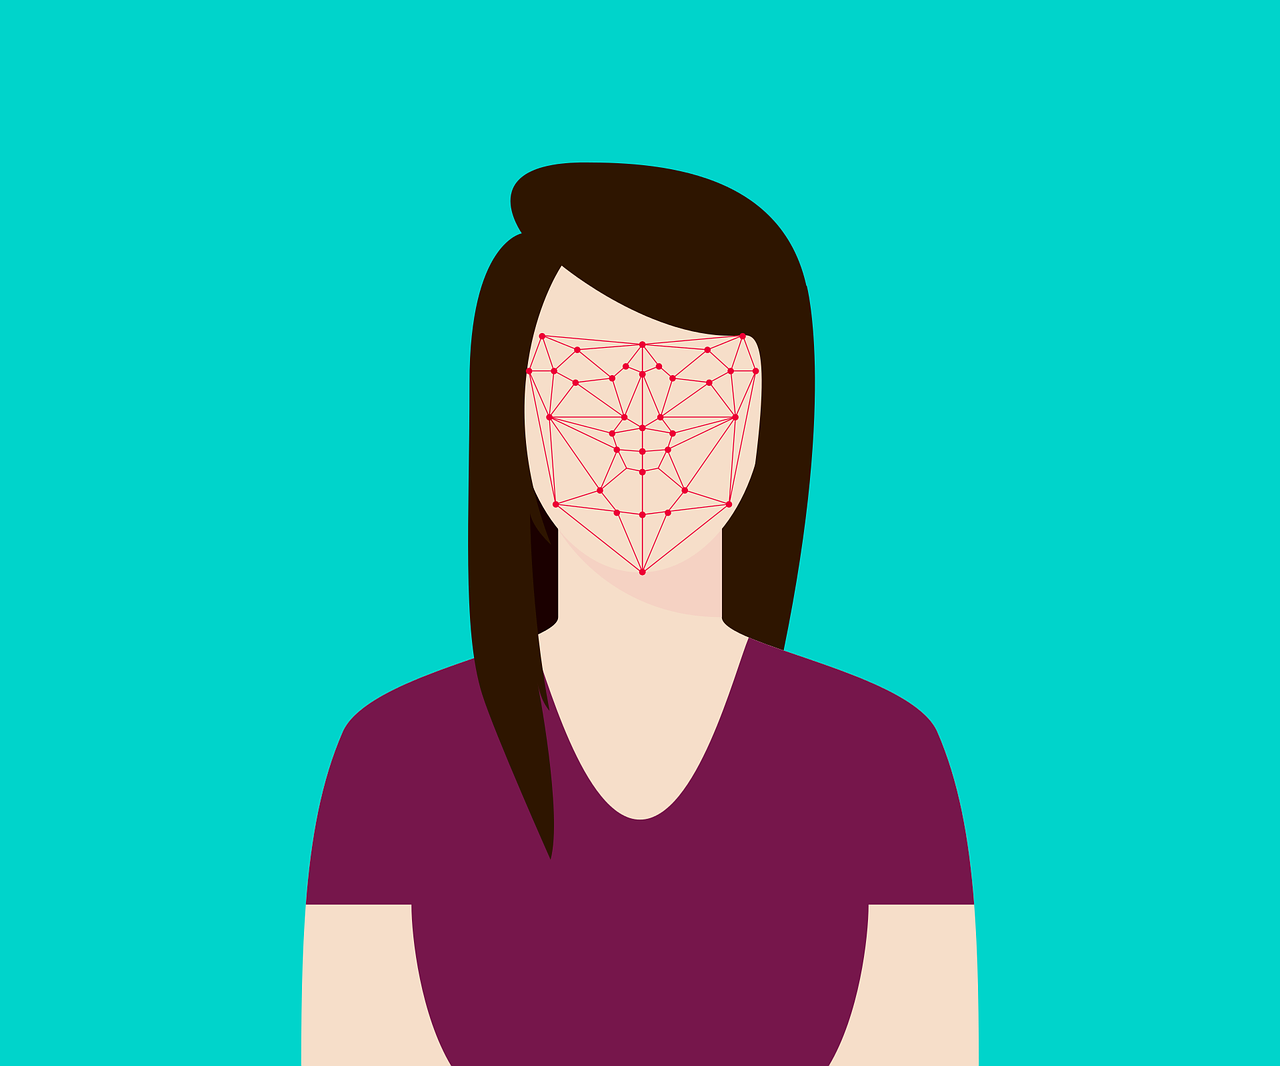 San Francisco becomes first US city to ban facial recognition